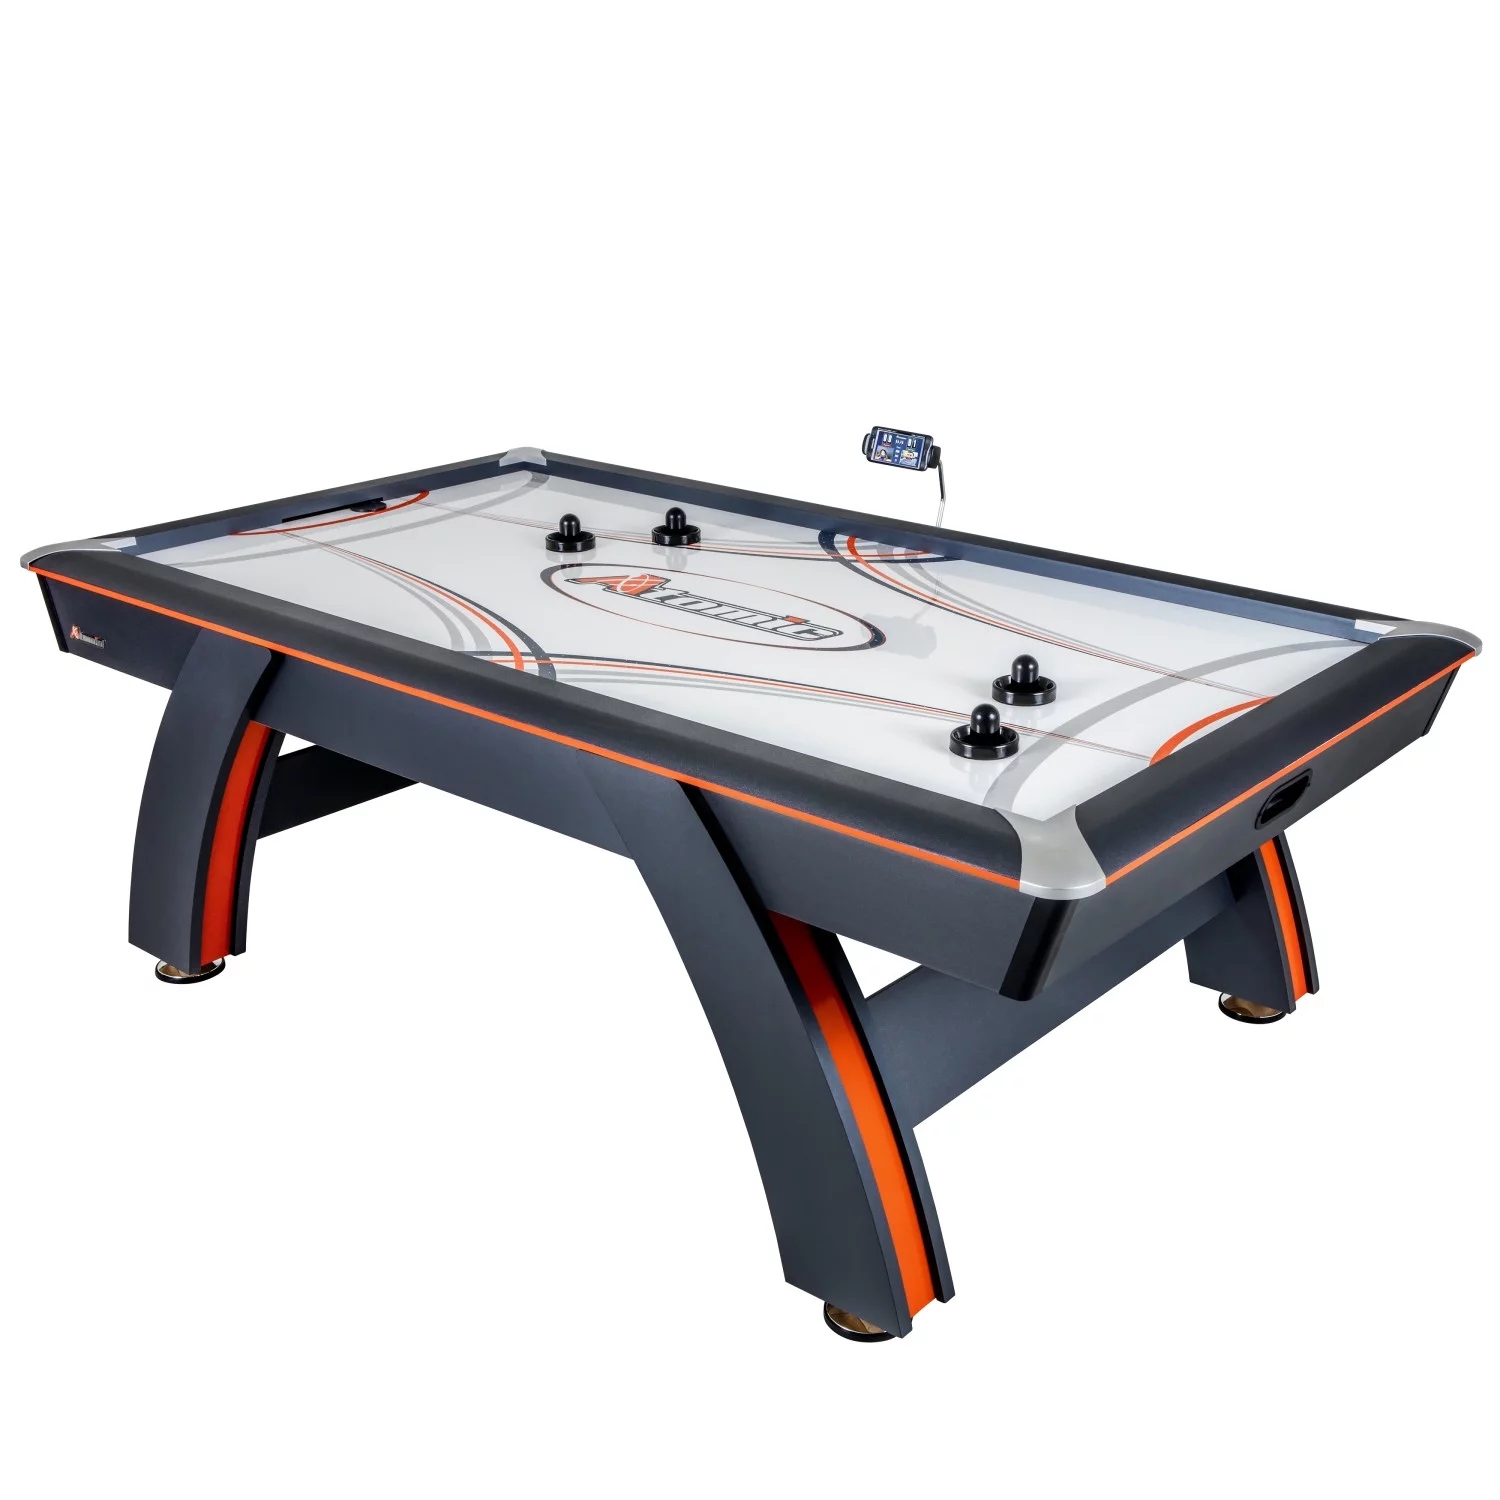 Grey and white Atomic 7.5’ Contour Air Powered Hockey Table